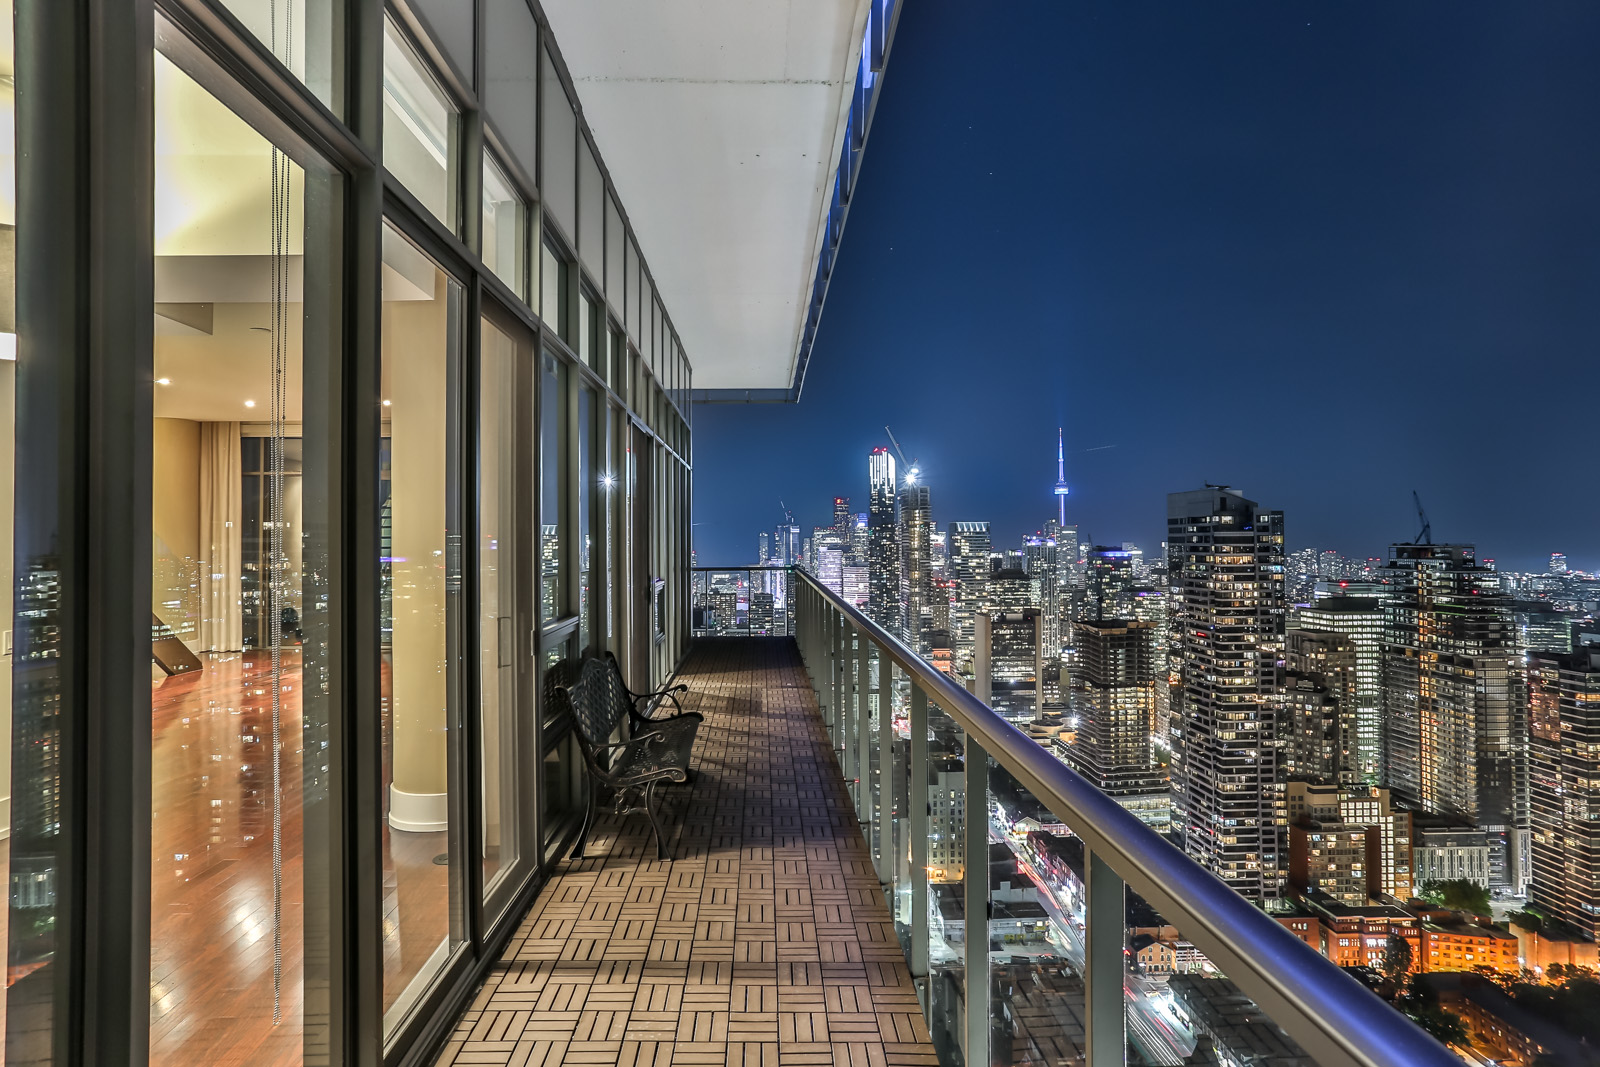 Another exterior shot; this one shows the balcony and Toronto at night.